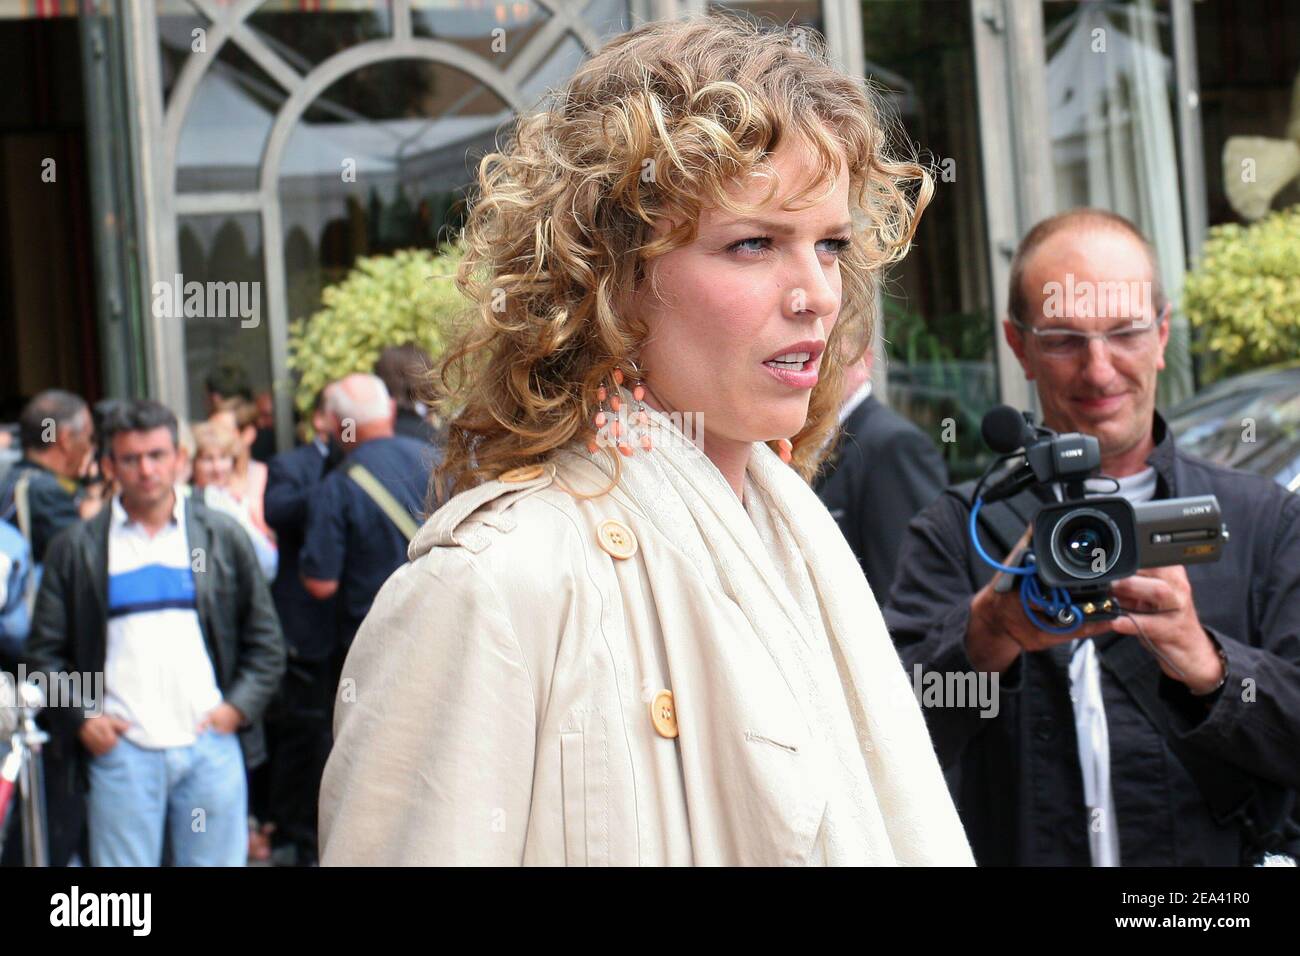 Czech born model Eva Herzigova during the 58th International Cannes film festival, in Cannes, southern France, on May 11, 2005. Photo by Benoit Pinguet/ABACA. Stock Photo